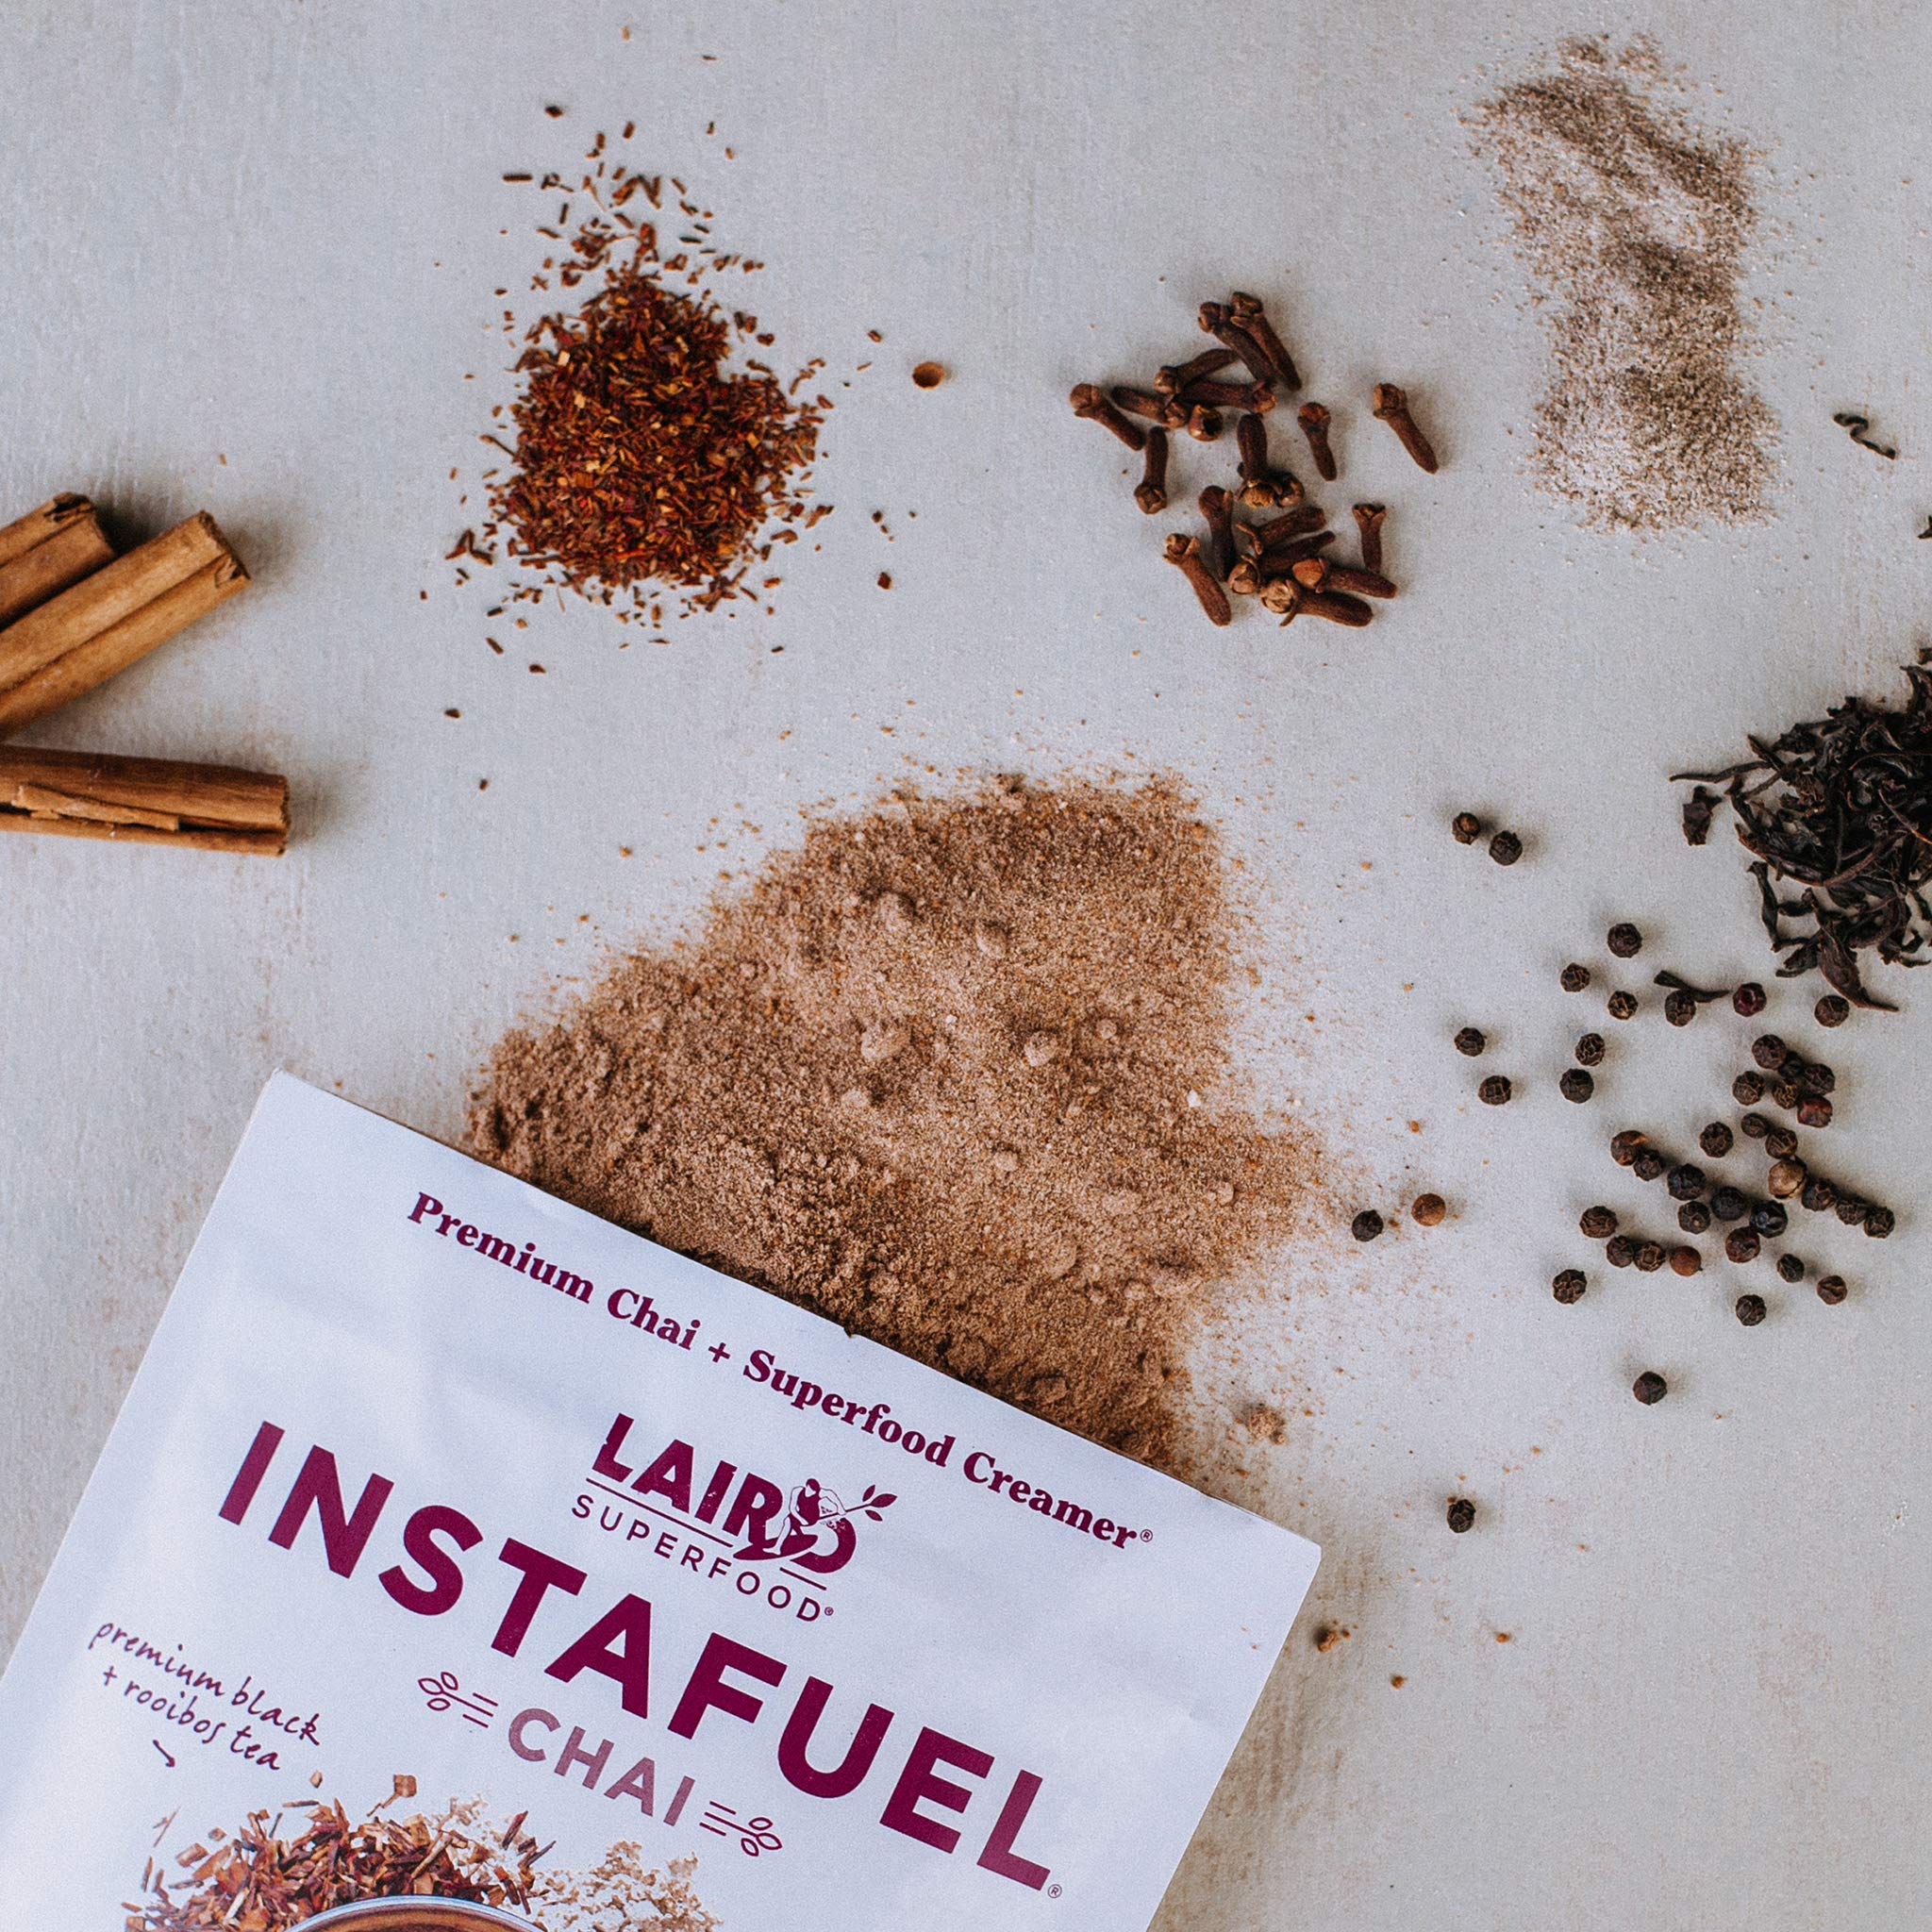 Laird Superfood Instafuel Chai Latte Powder - Delicious Mix of Instant Chai Tea and Our Original Superfood Non-Dairy Creamer, 8oz Bag - image 4 of 5